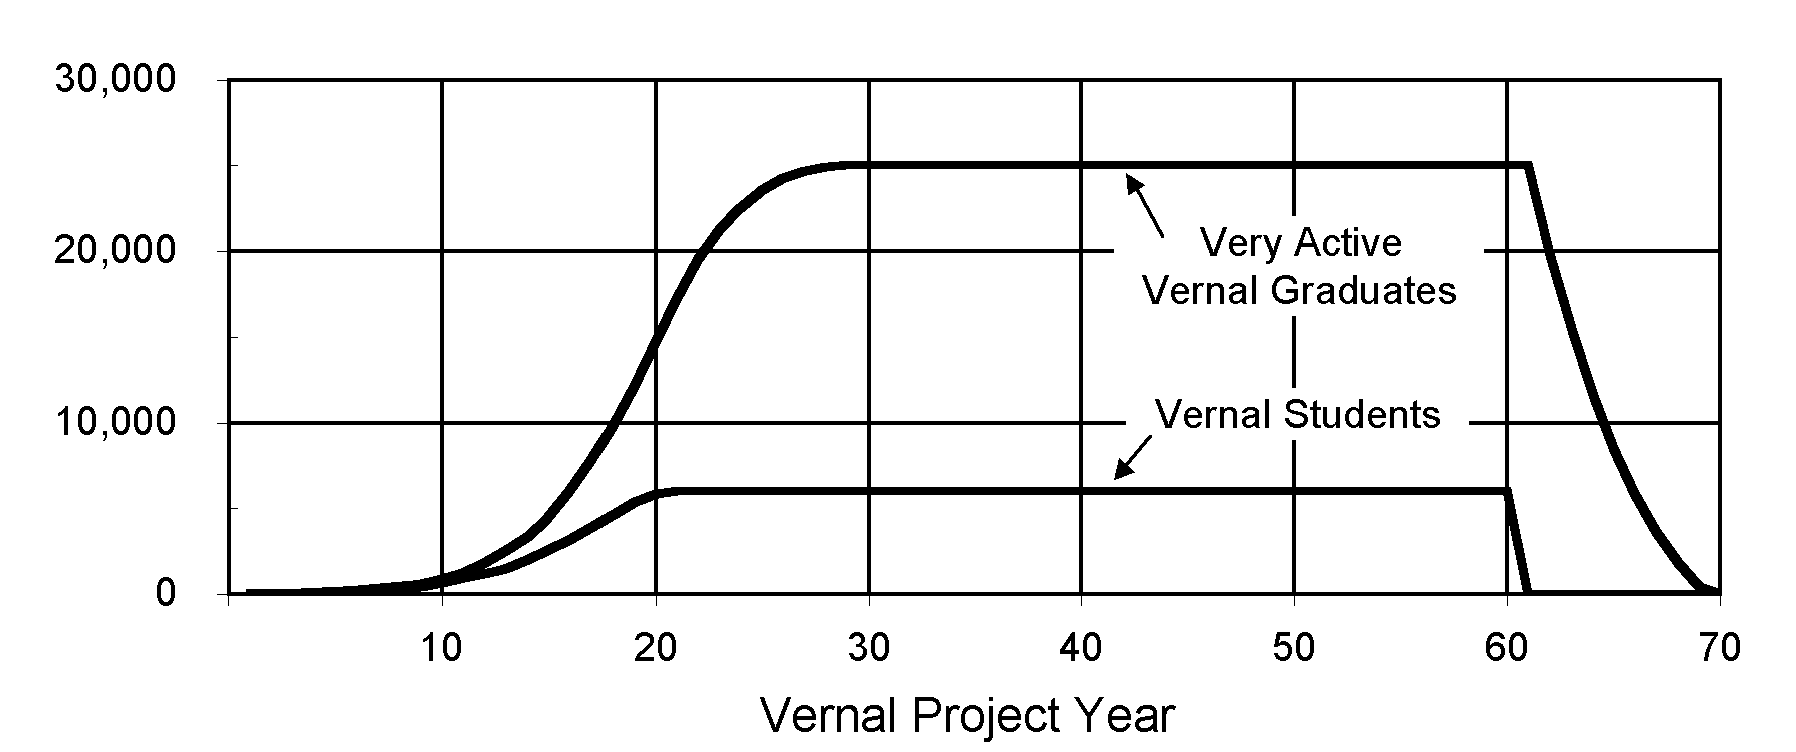 Projected Number of Vernal Graduates